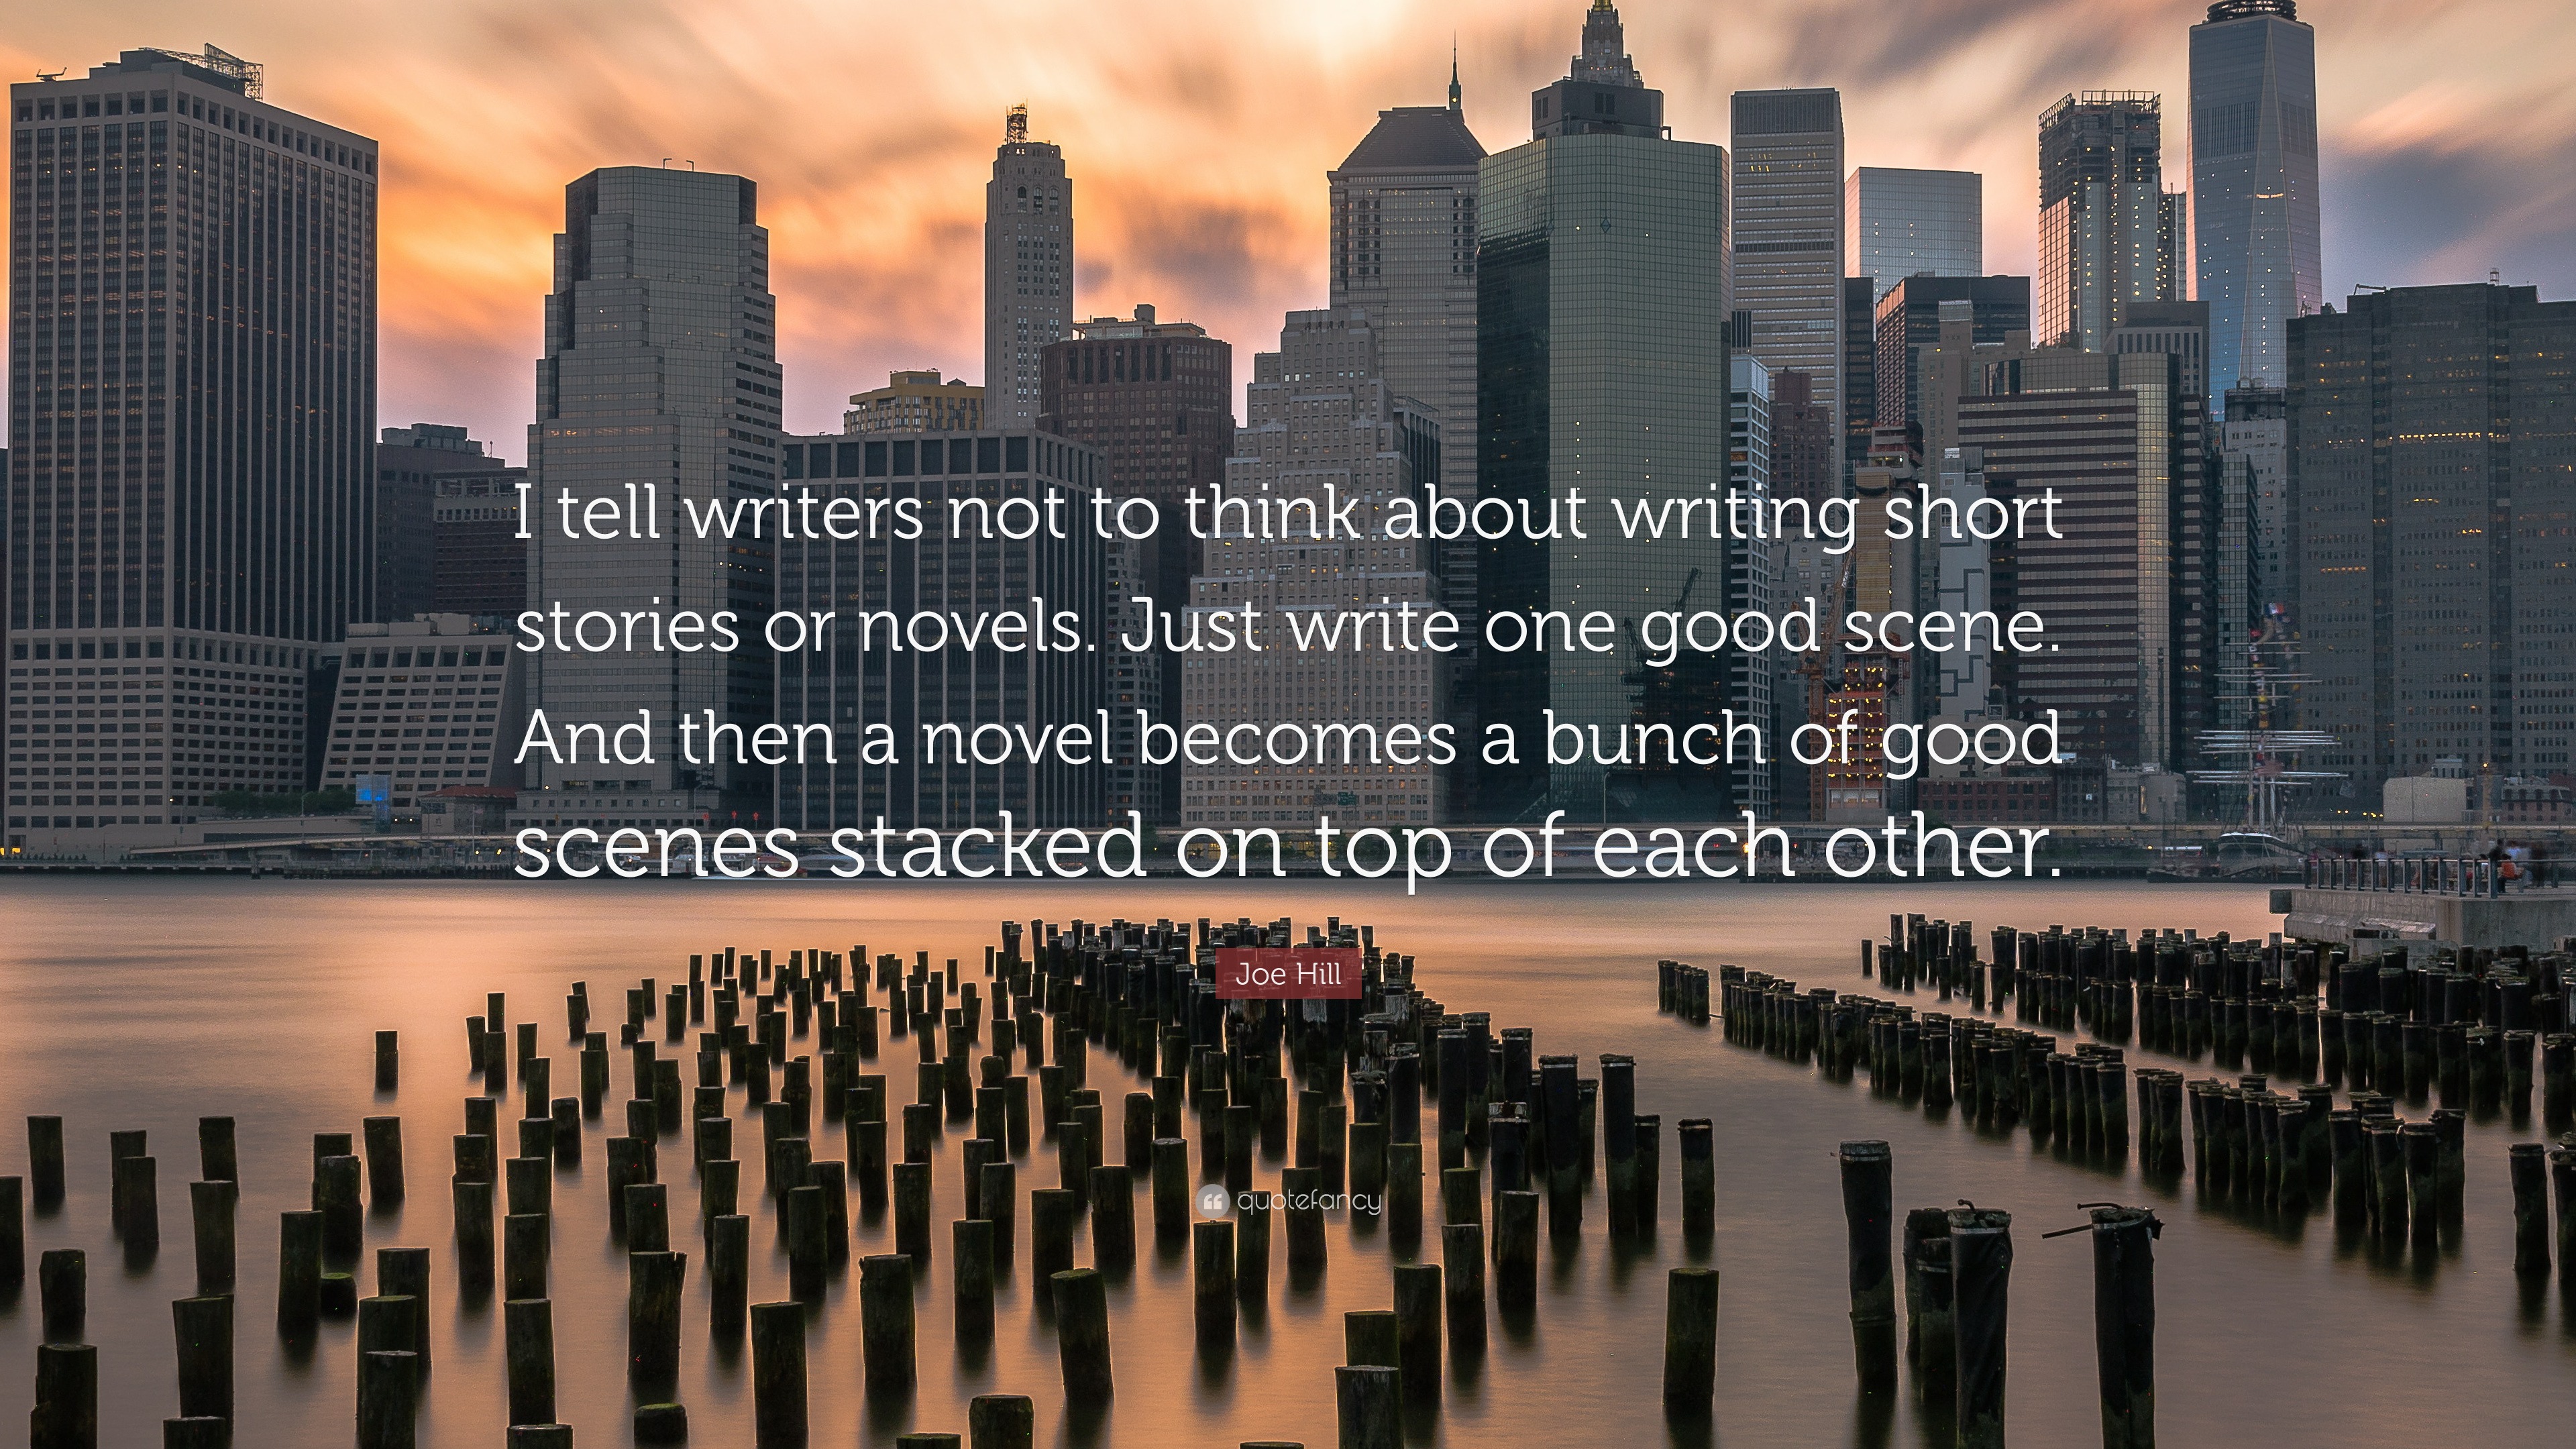 Joe Hill Quote: “I tell writers not to think about writing short